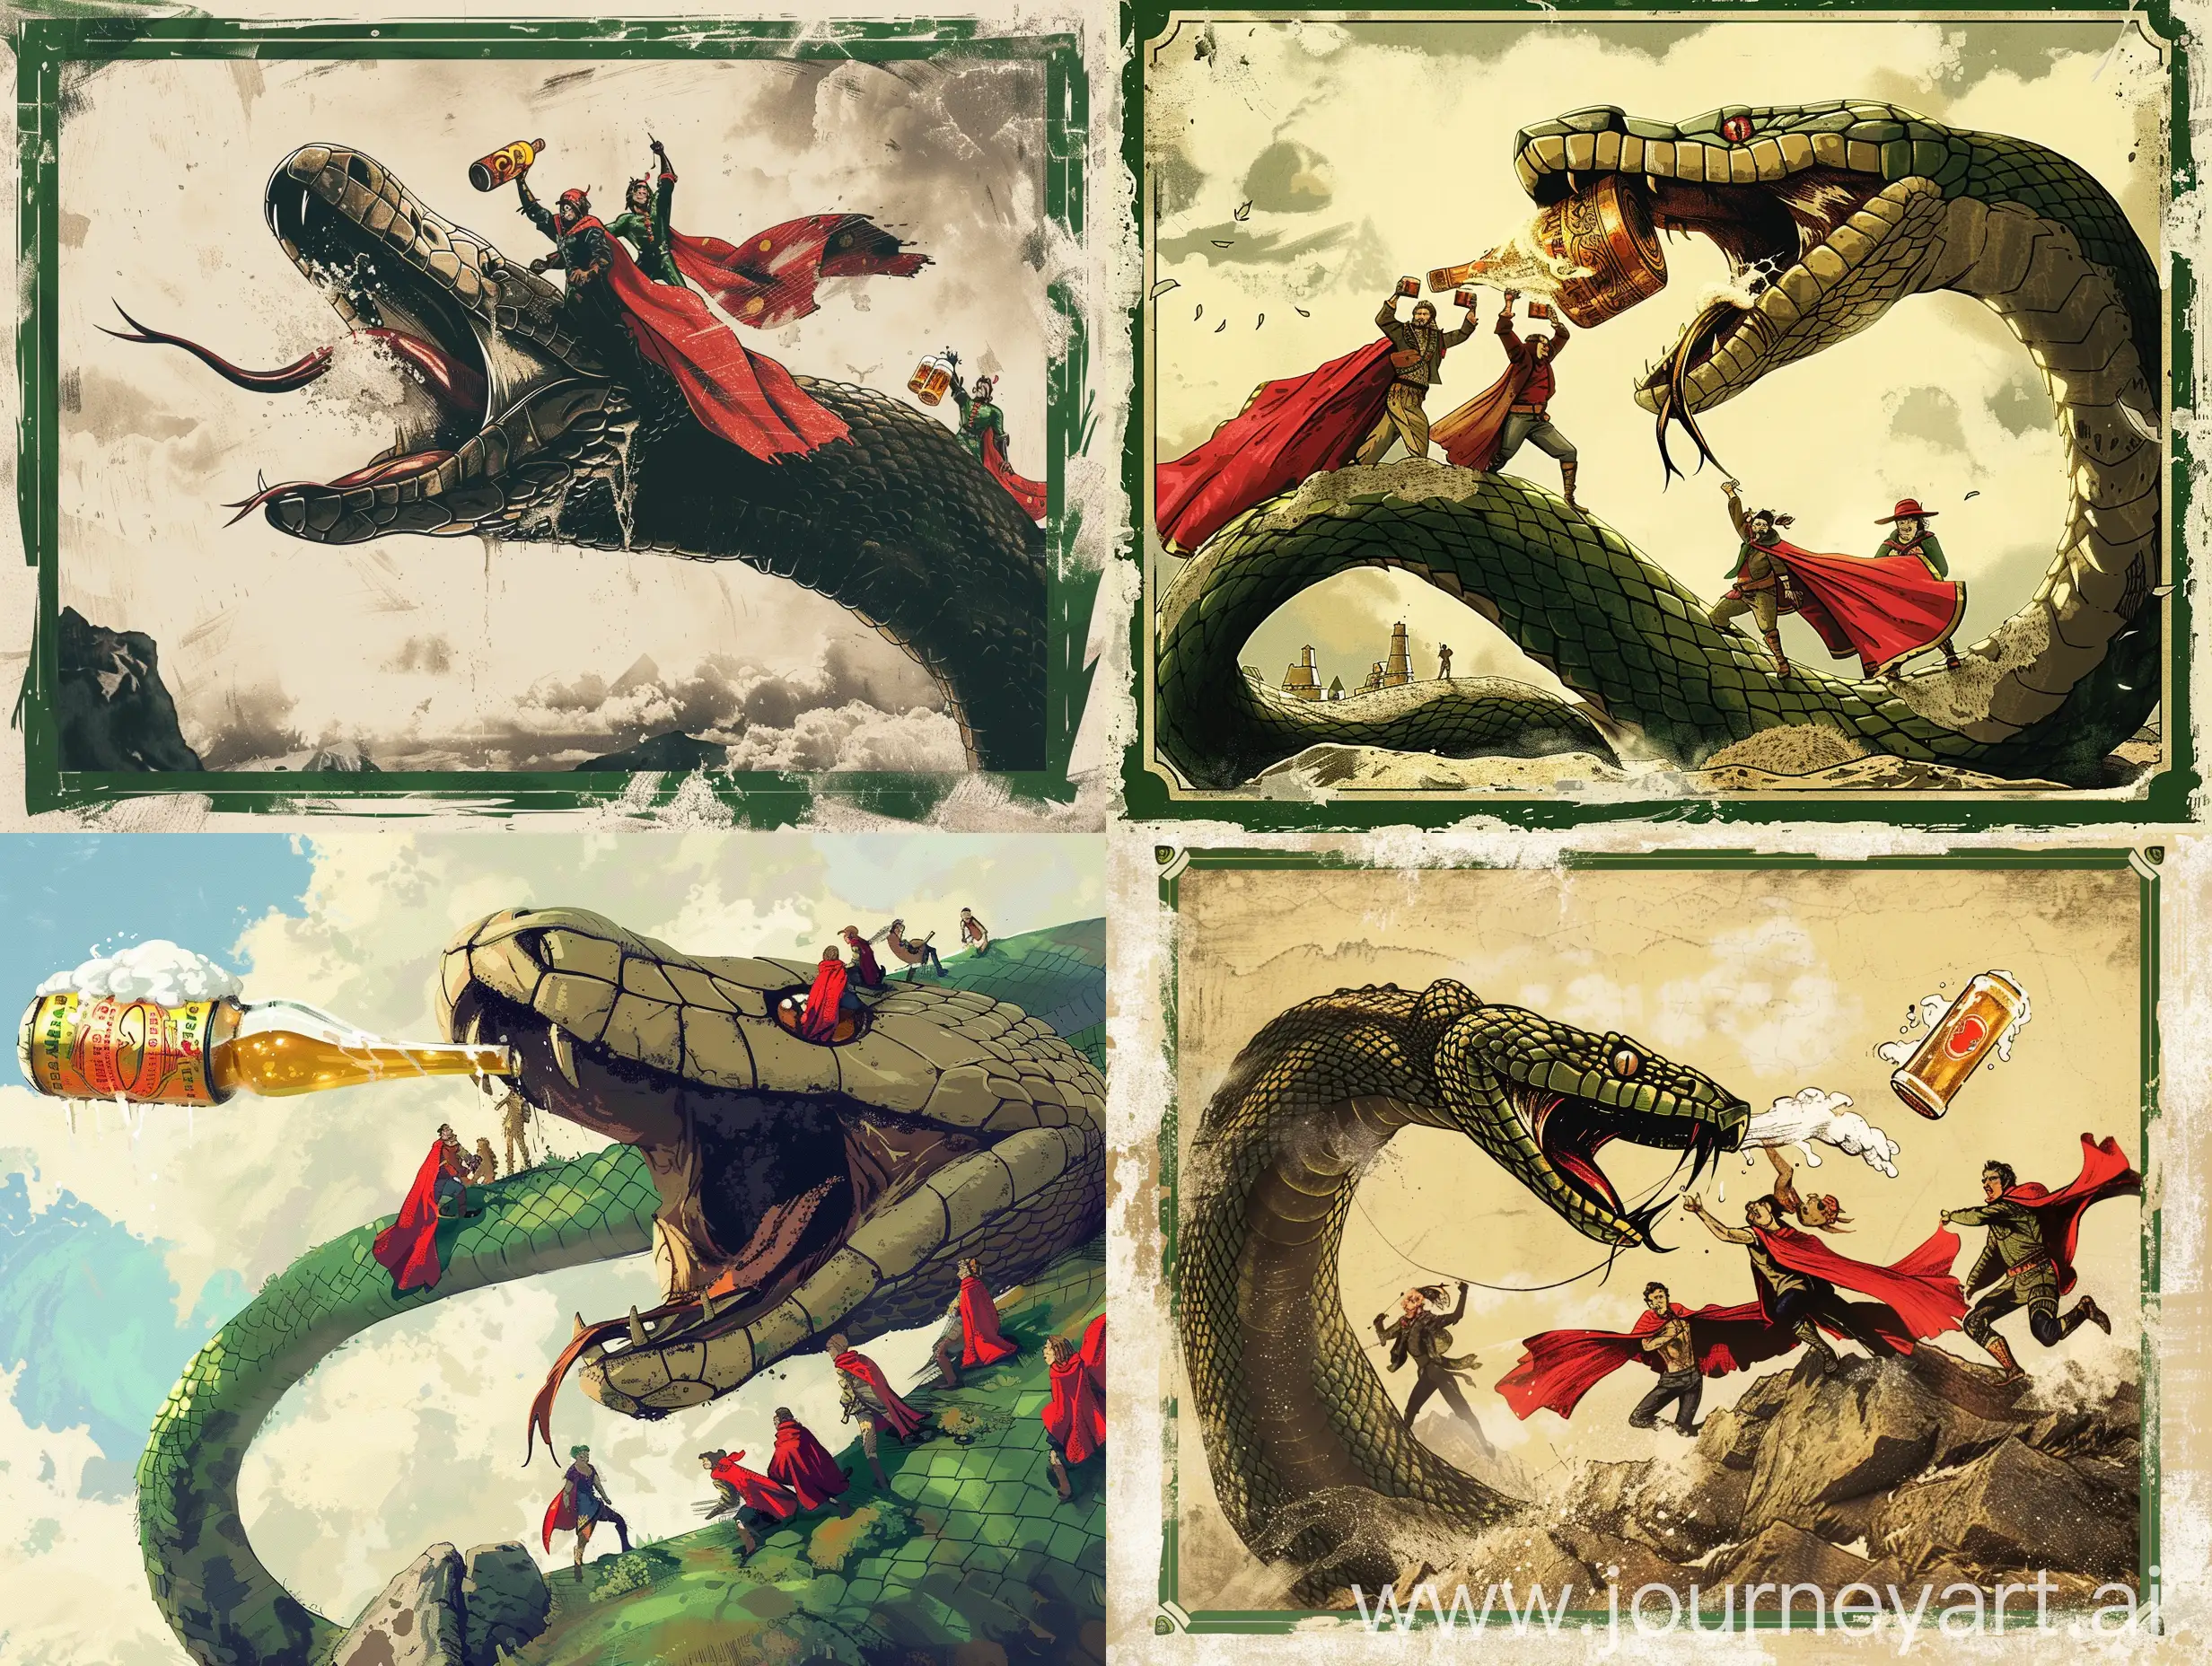 People-in-Red-Capes-Battling-Giant-Snake-Spitting-Beer